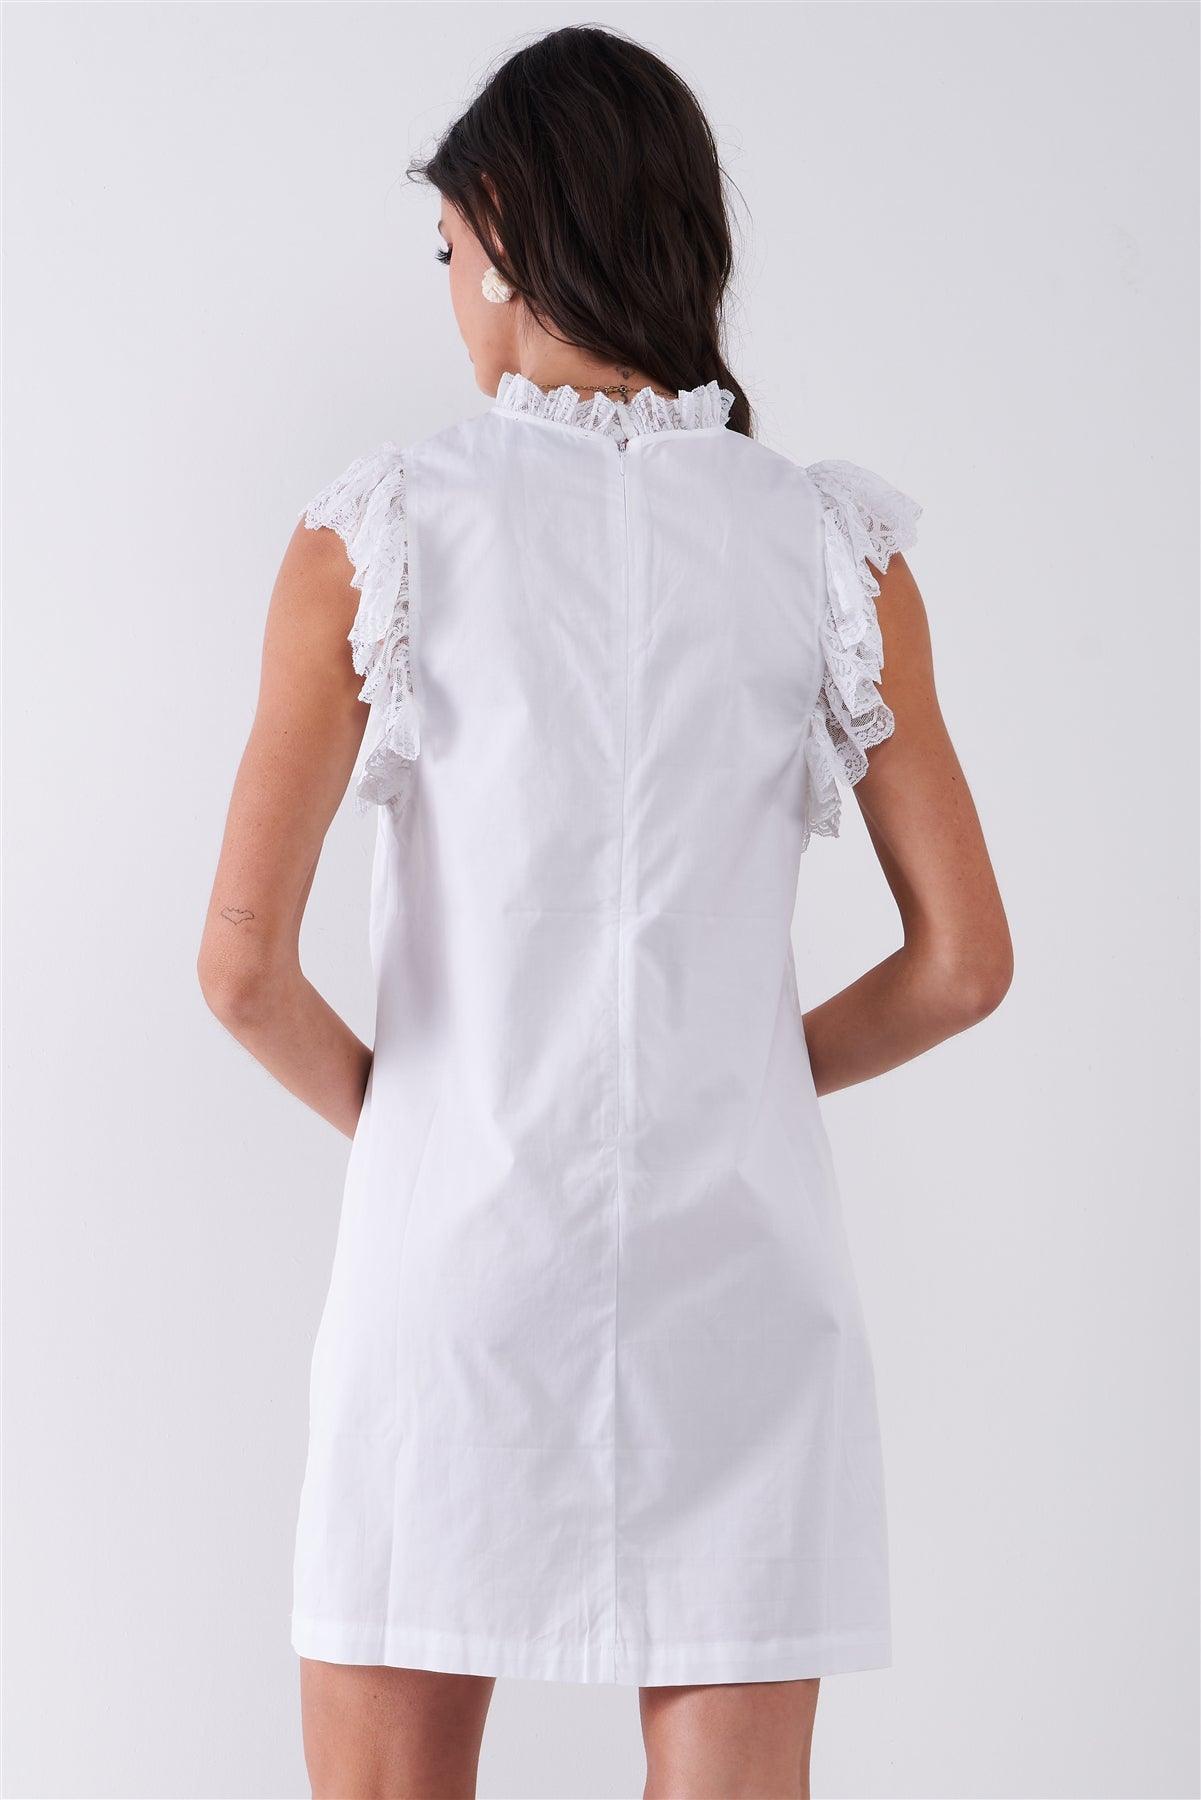 White Solid Sleeveless Lace Frill Trim Relaxed Mini Dress /1-1-2-1